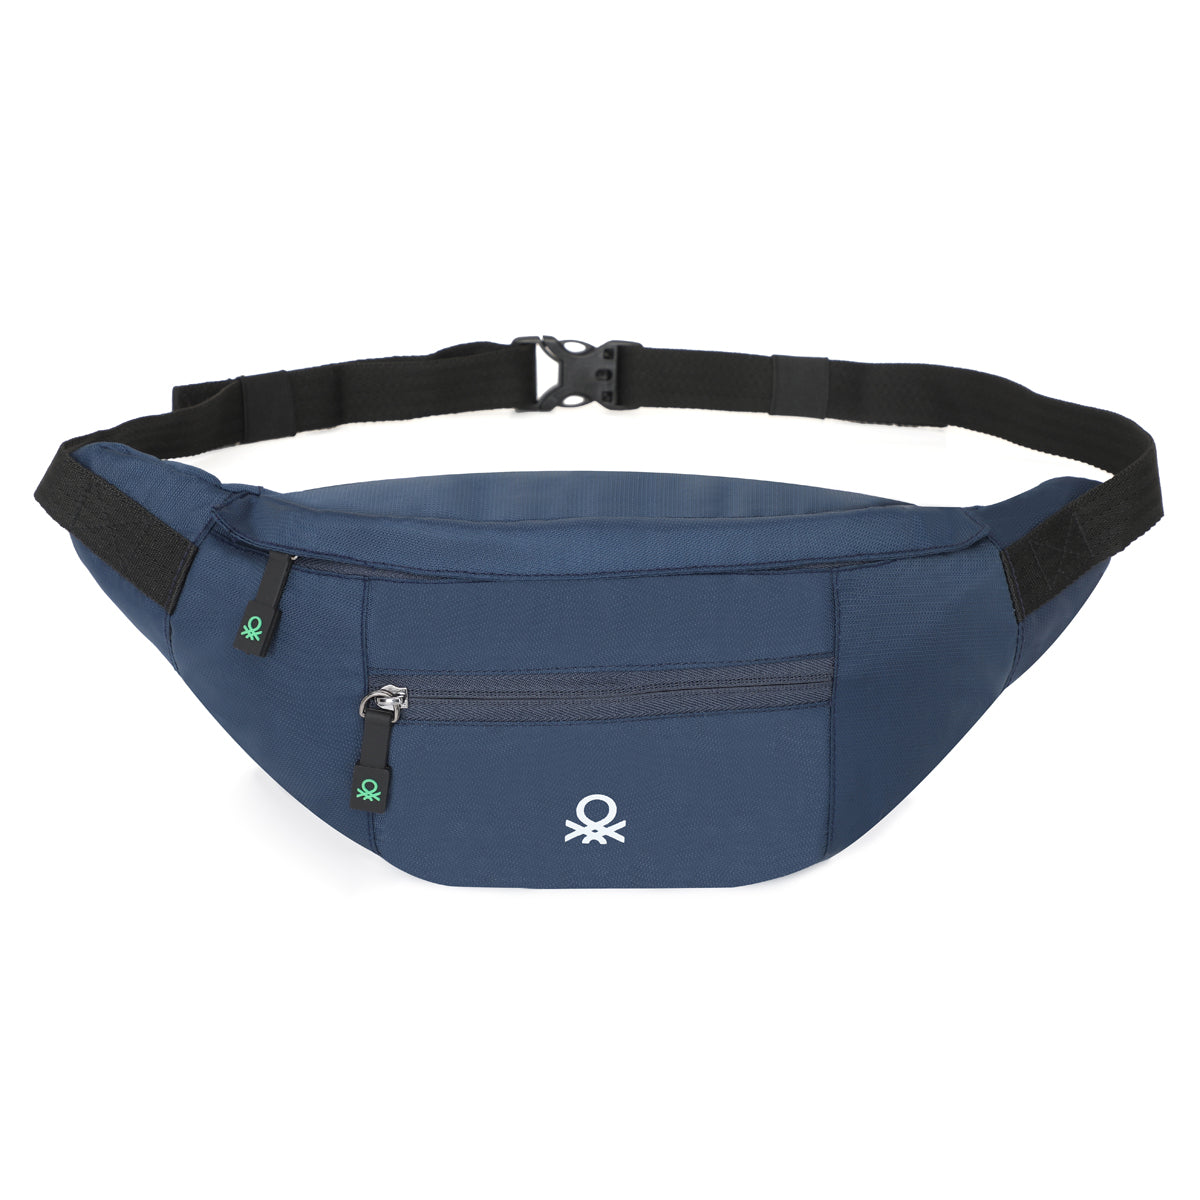 United Colors of Benetton Augustus Waist Pouch Navy